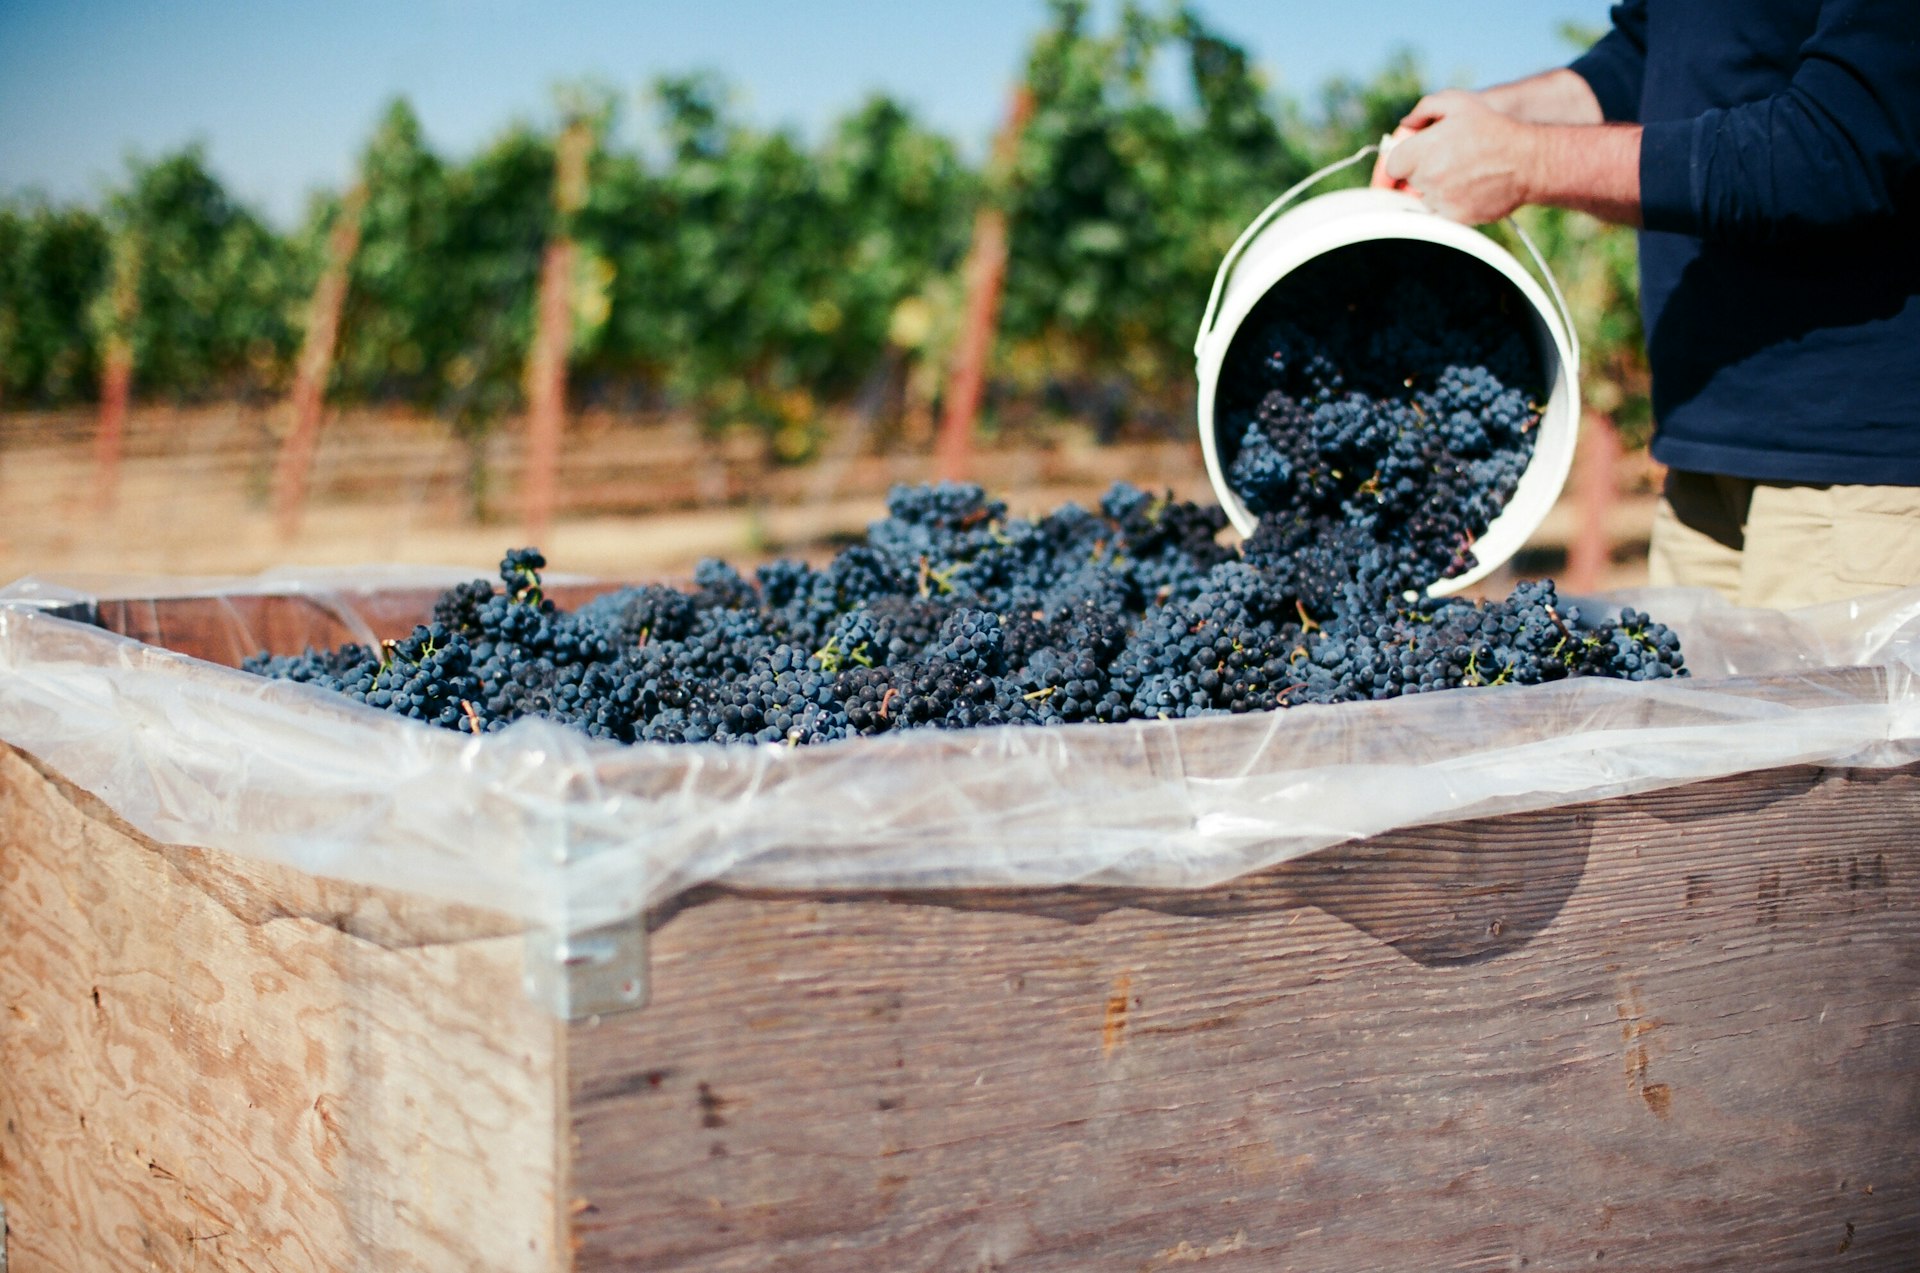 A person harvests bunches of grapes for winemaking